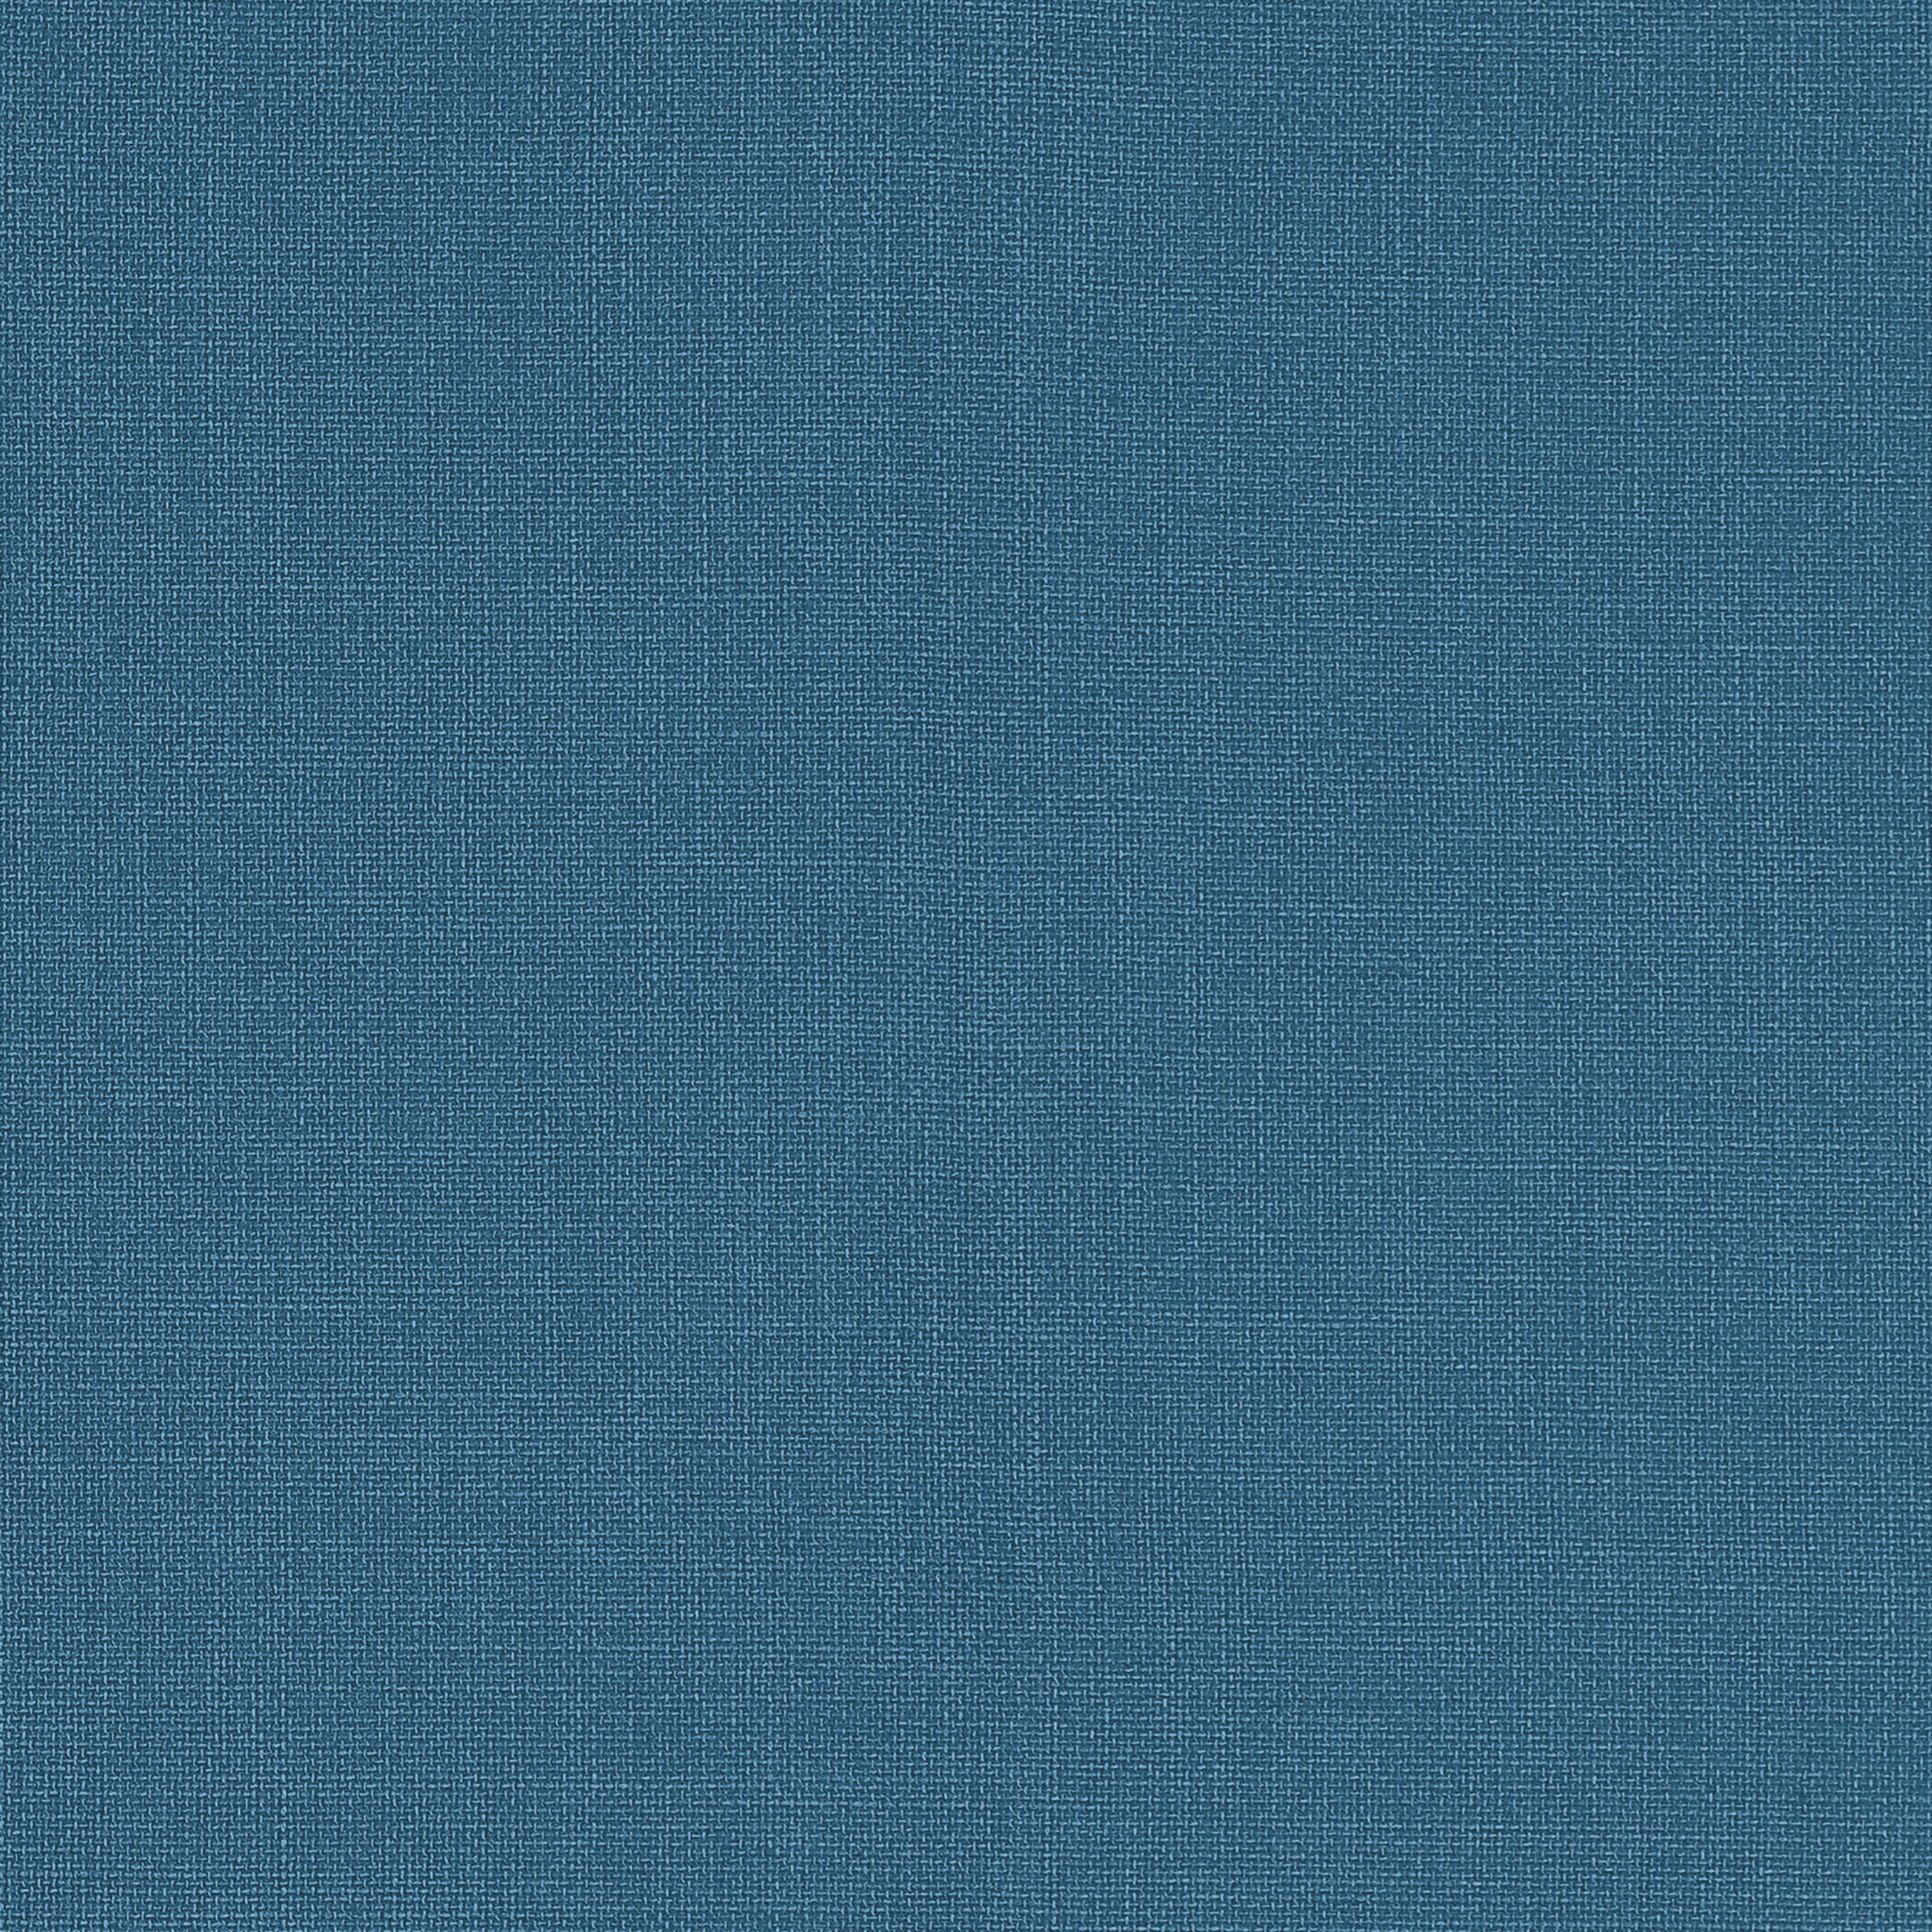 Brynn fabric in teal color - pattern number W81684 - by Thibaut in the Locale collection